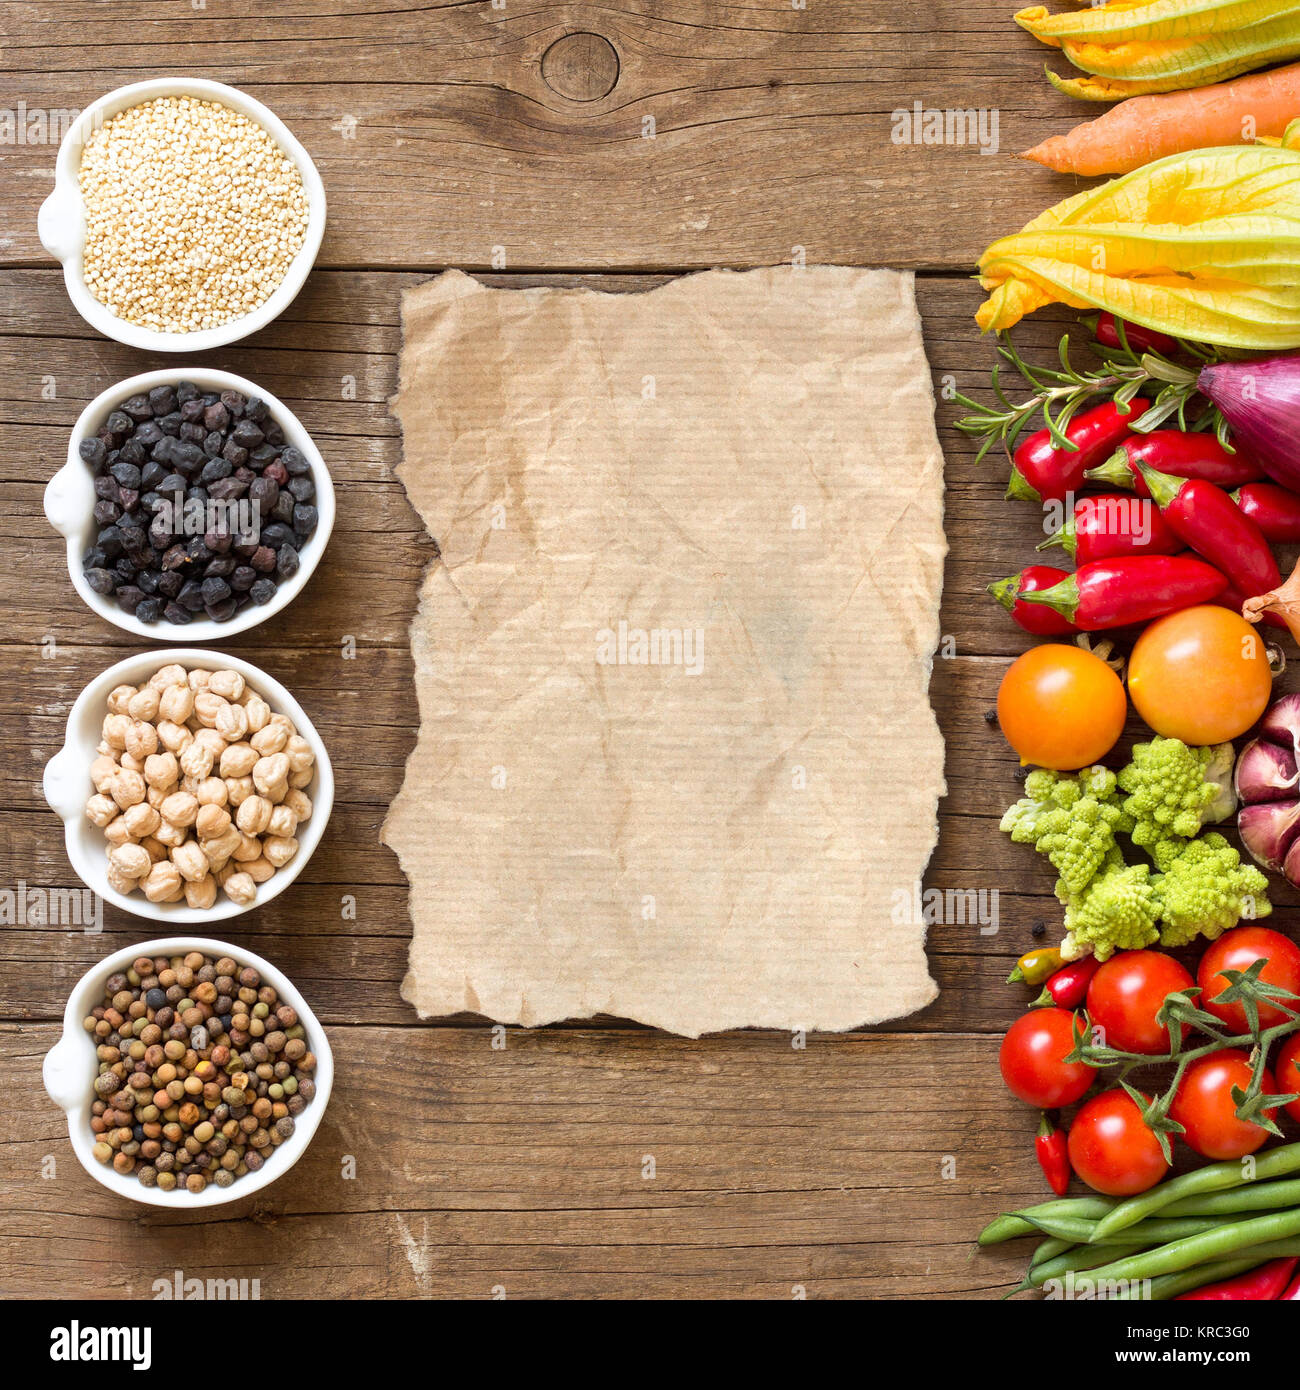 Cereals, legumes and vegetables Stock Photo